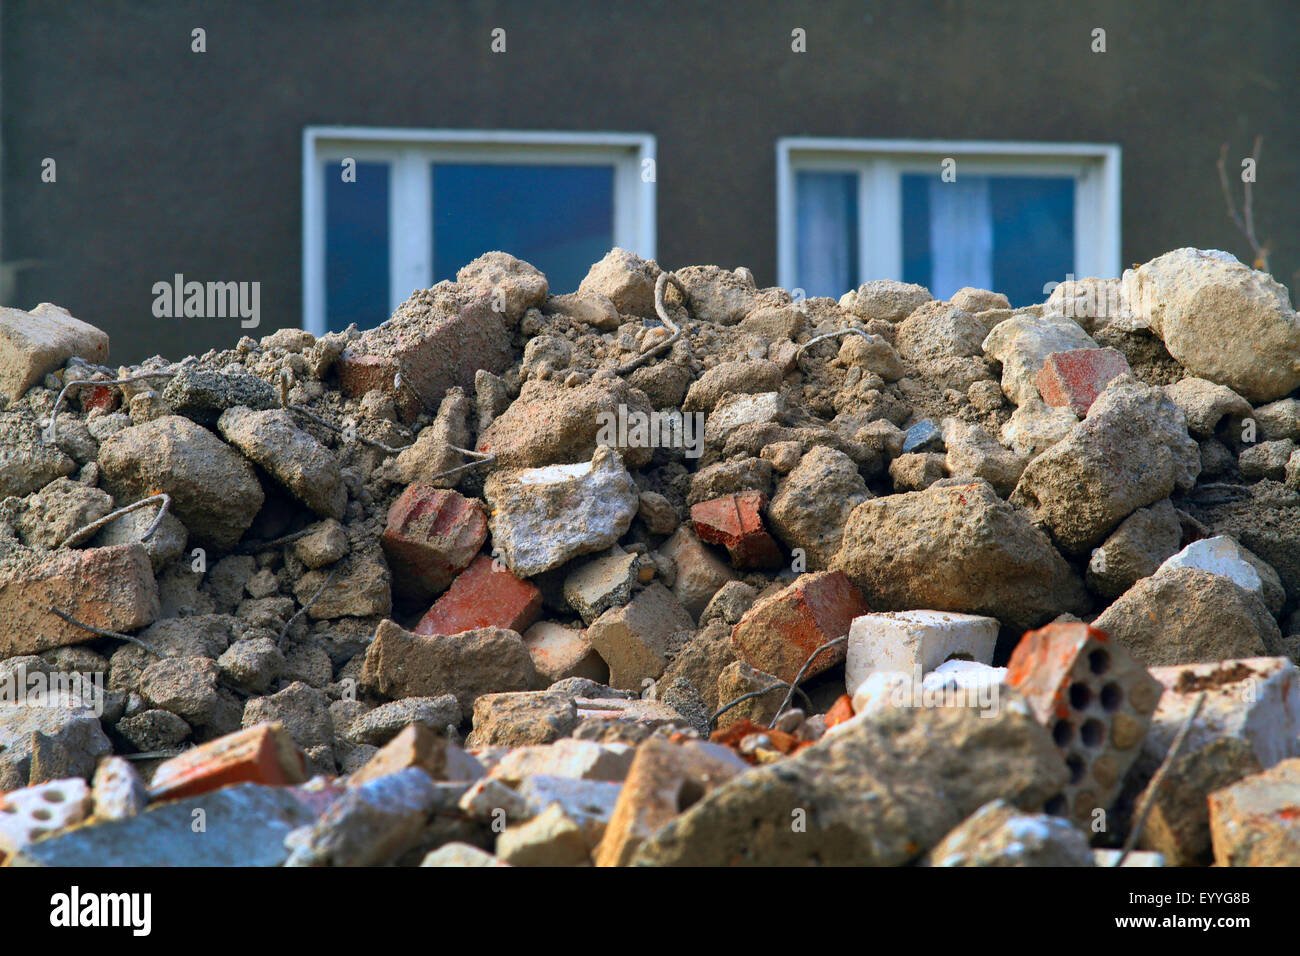 demolition waste inf front of a building, Germany Stock Photo